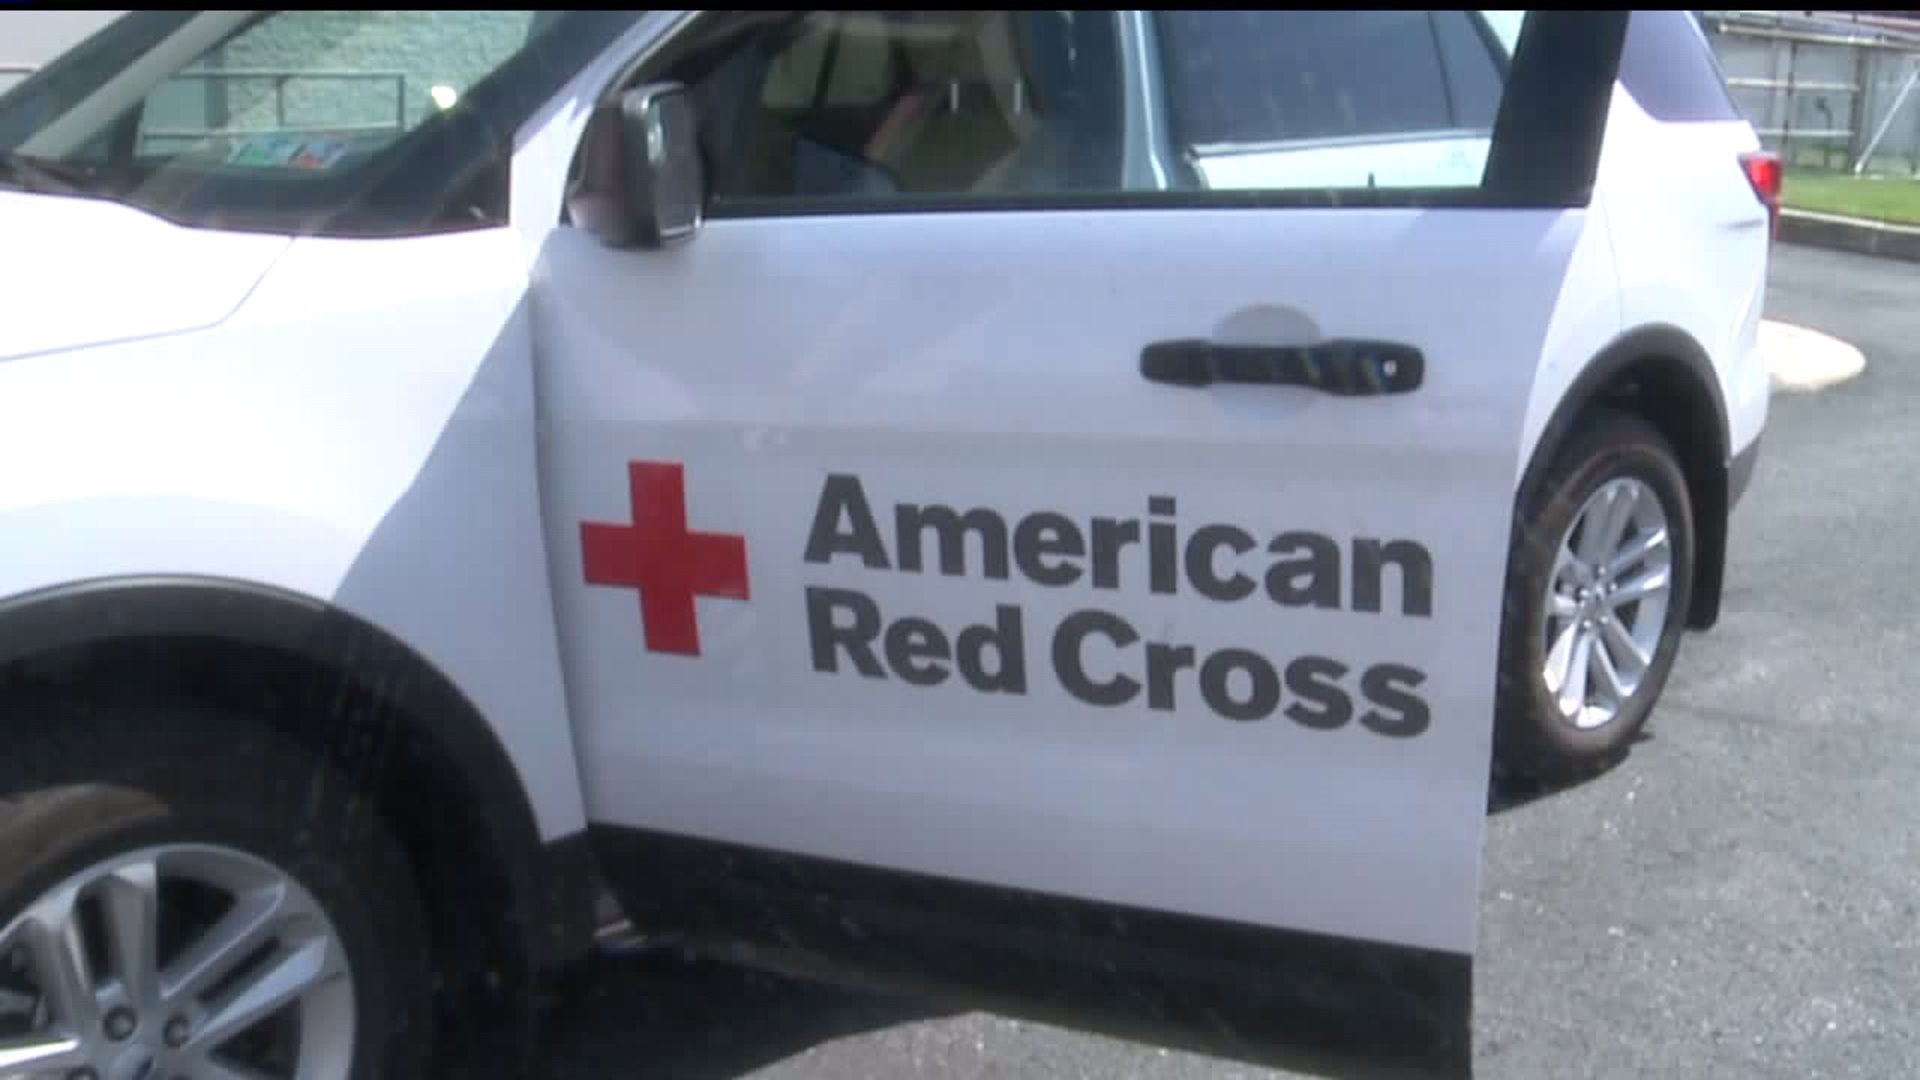 Lancaster Red Cross receives new vehicle to respond to emergency situations